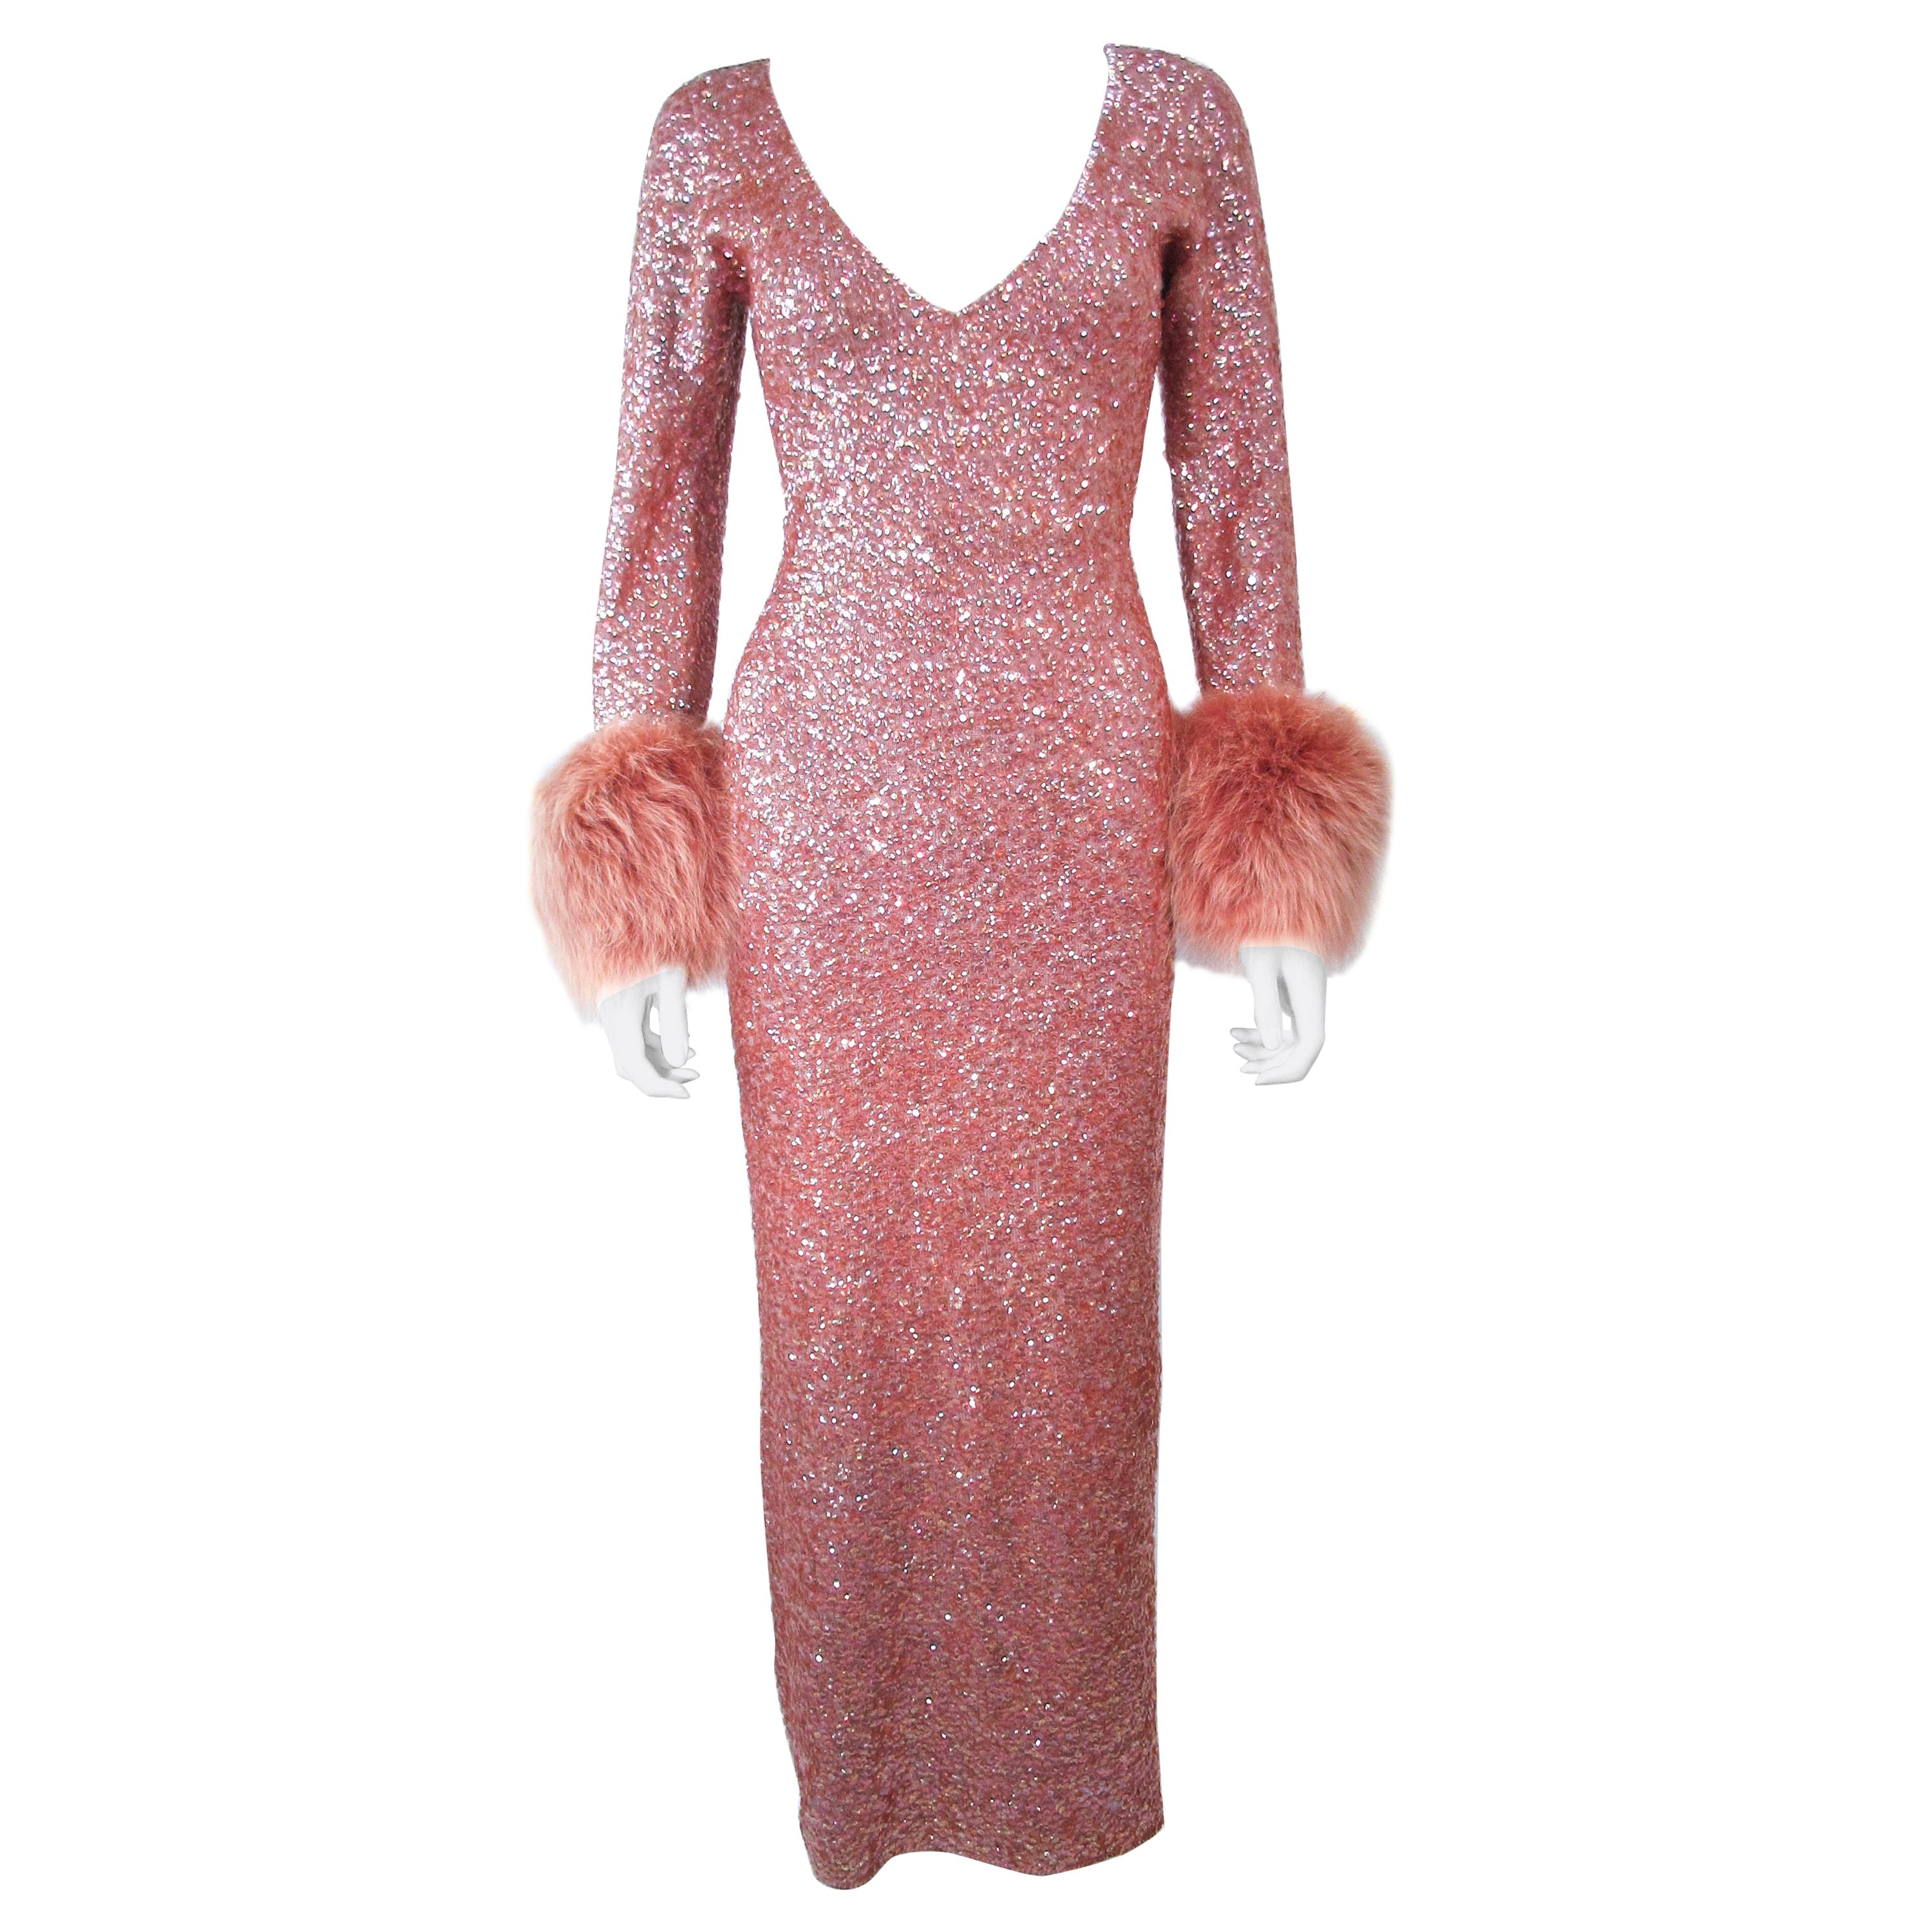 Vintage Rose Stretch Wool Sequin Gown W/ Fox Fur Trim Attributed to Gene Shelly